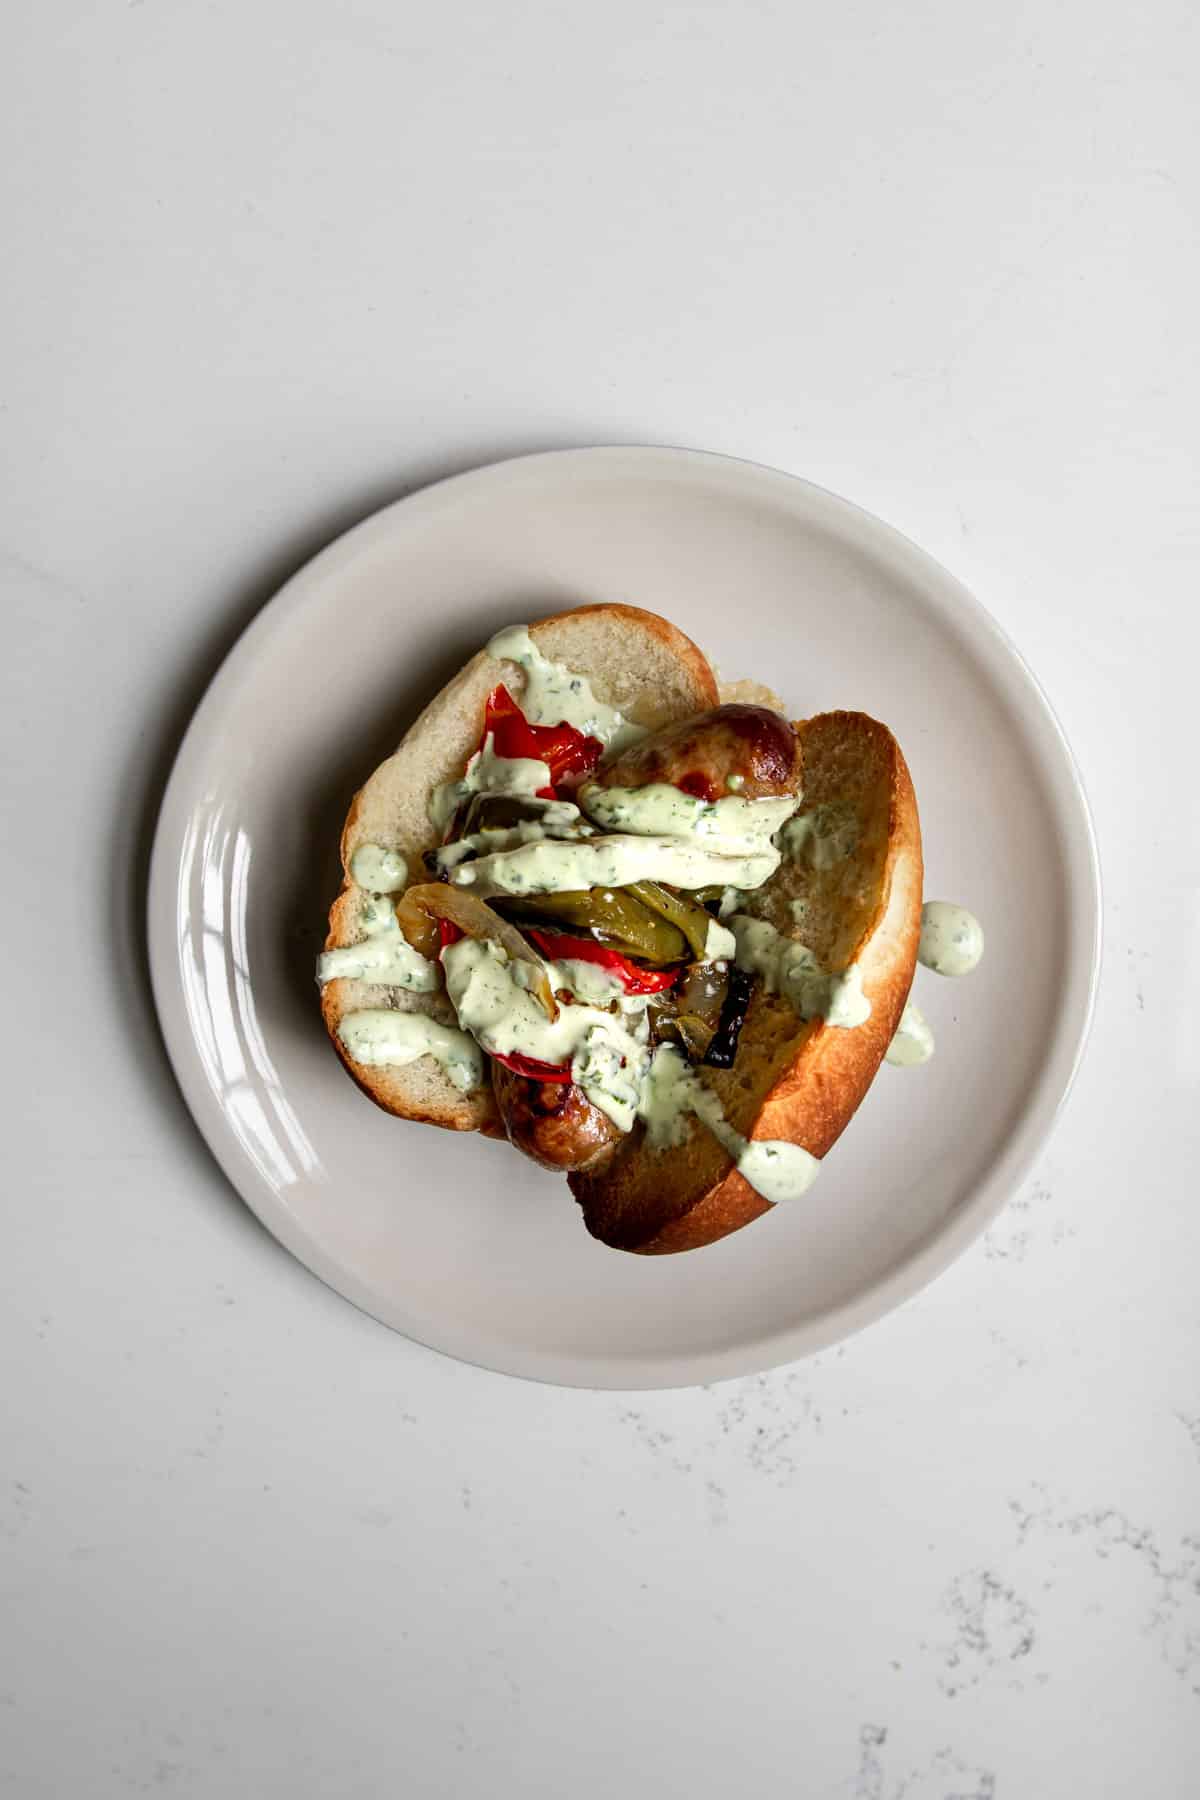 Italian Sausage Sandwich with Onions, Peppers and Basil Aioli Sauce.